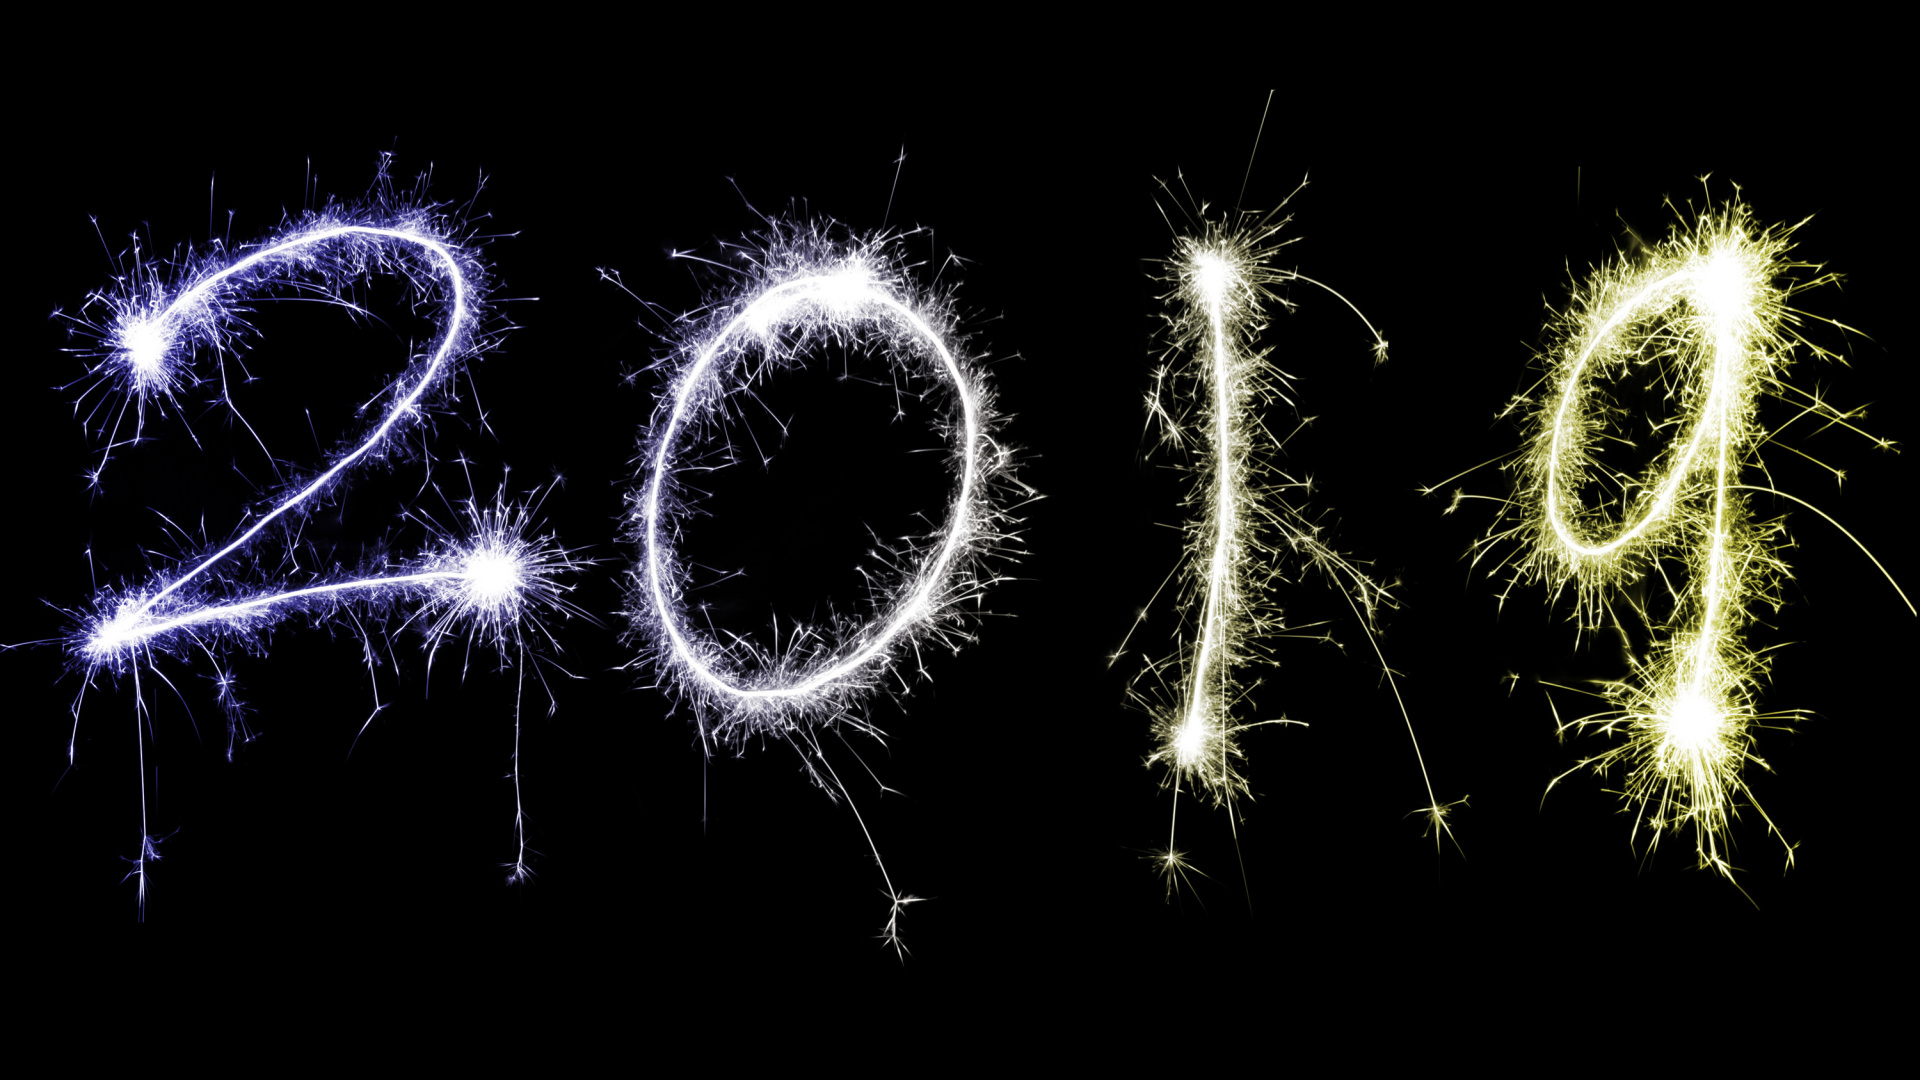 New Years Eve, New Year, Fireworks, Sparkler, Darkness. Wallpaper in 1920x1080 Resolution